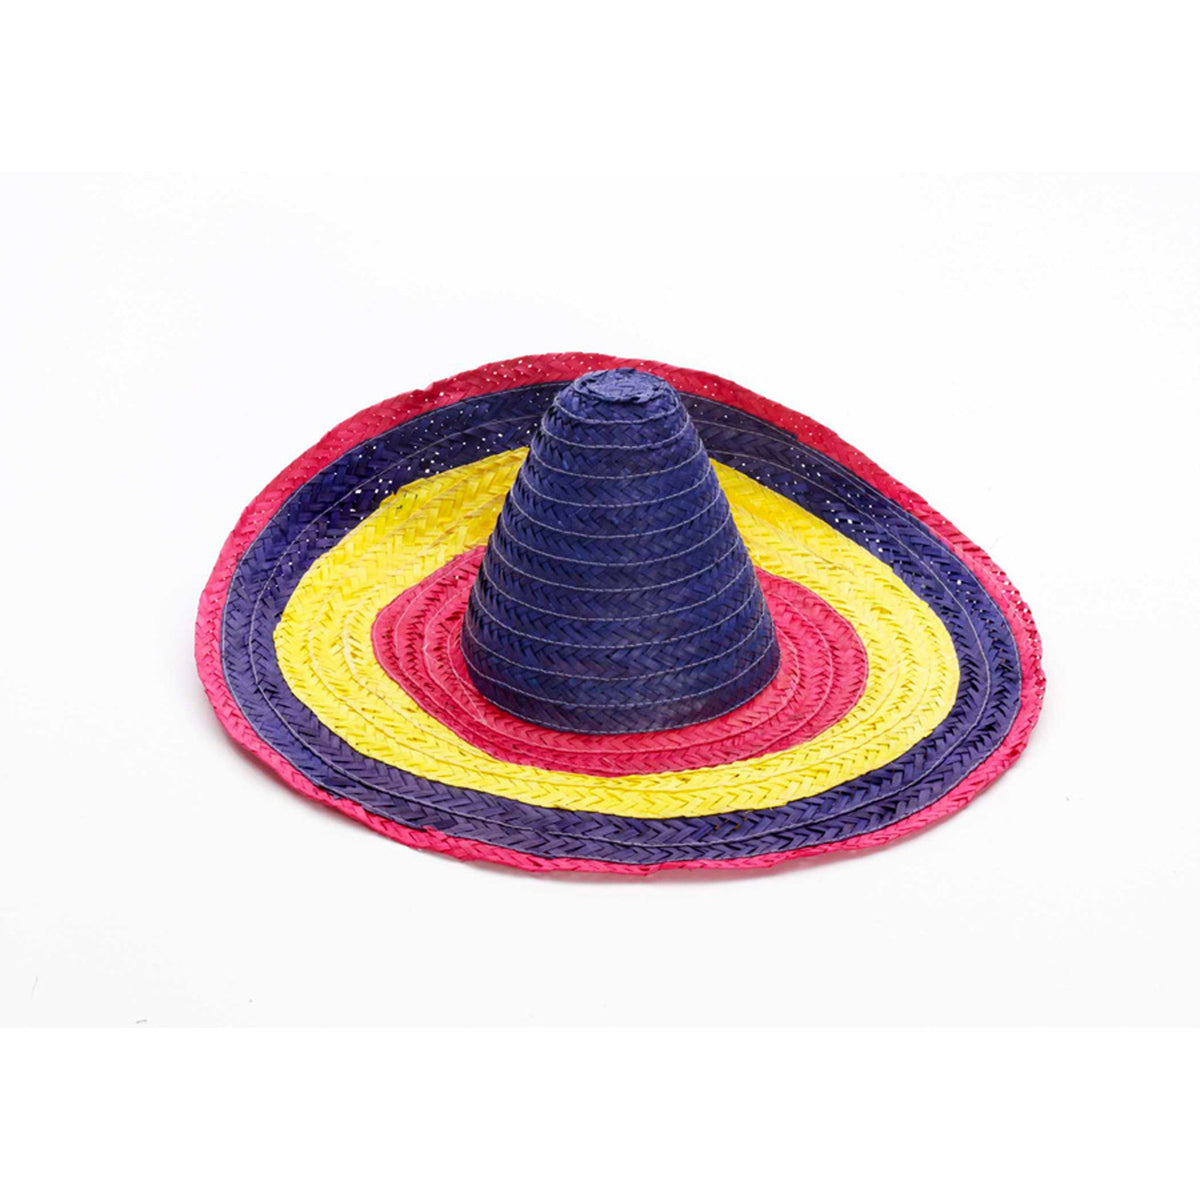 RUBIES II (Ruby Slipper Sales) Costume Accessories Tri-Color Sombrero Hat for Adults 721773721151